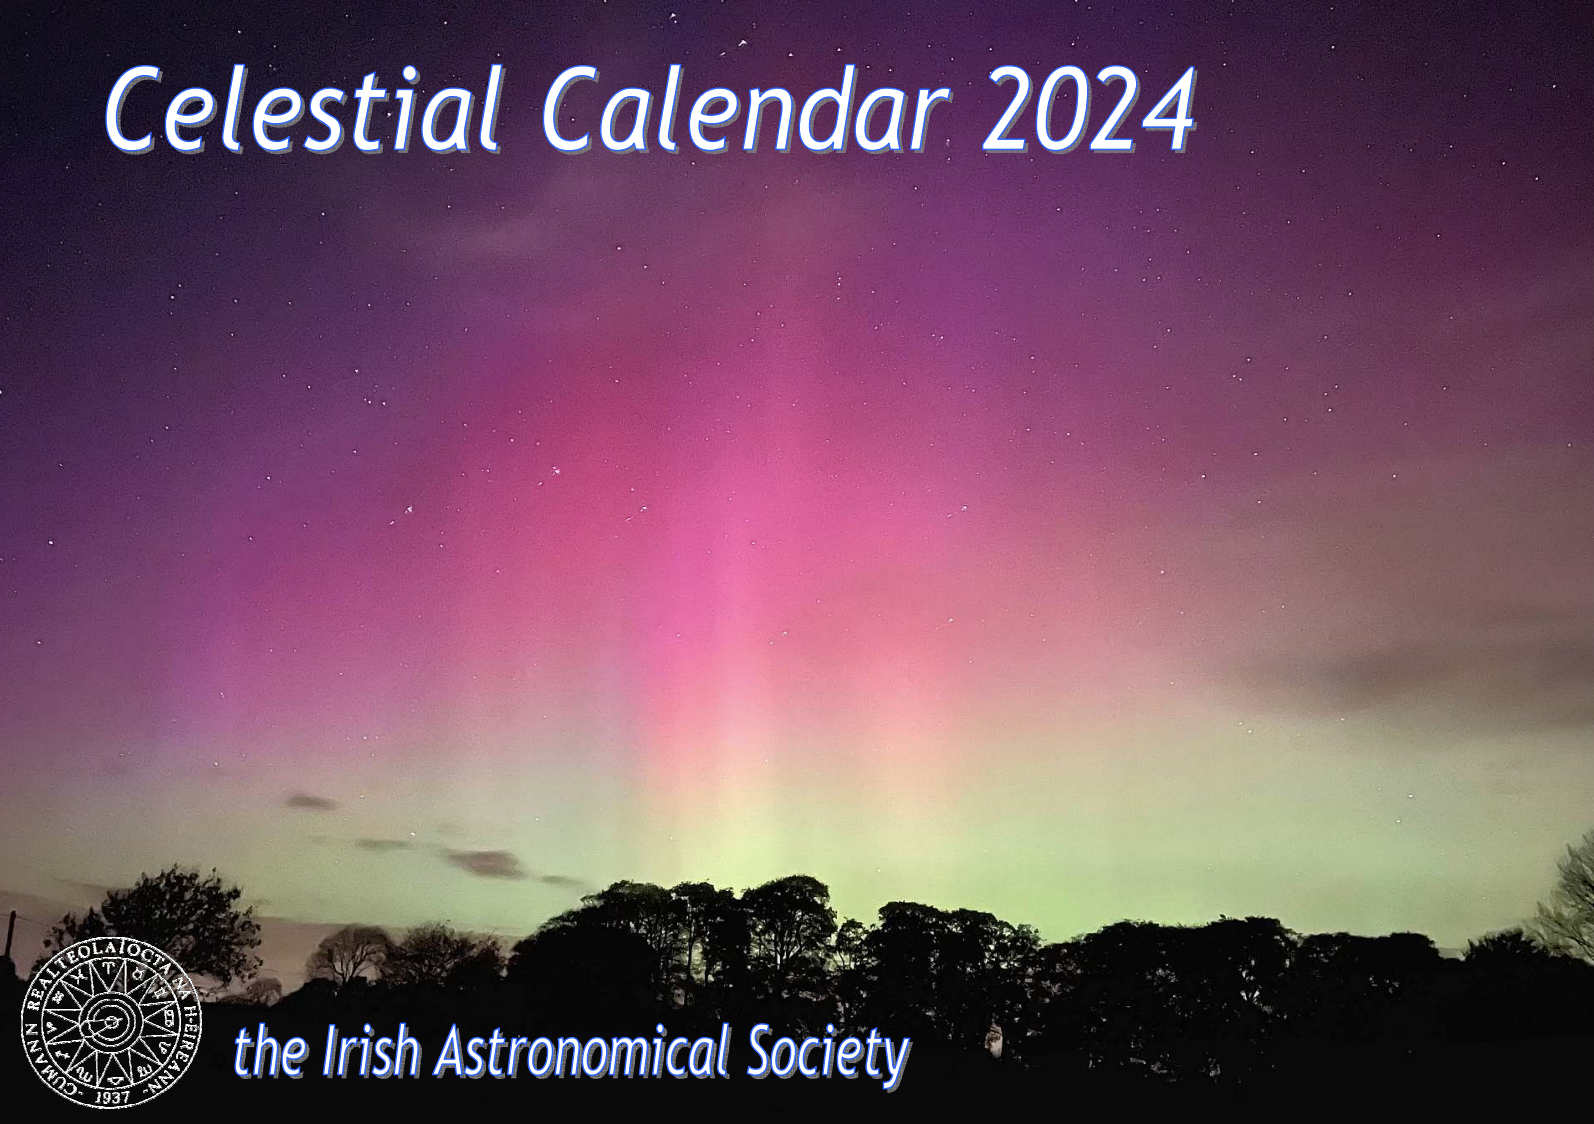 Aurora northern lights photography, front cover for The Irish Astronomical Society's 2024 calendar